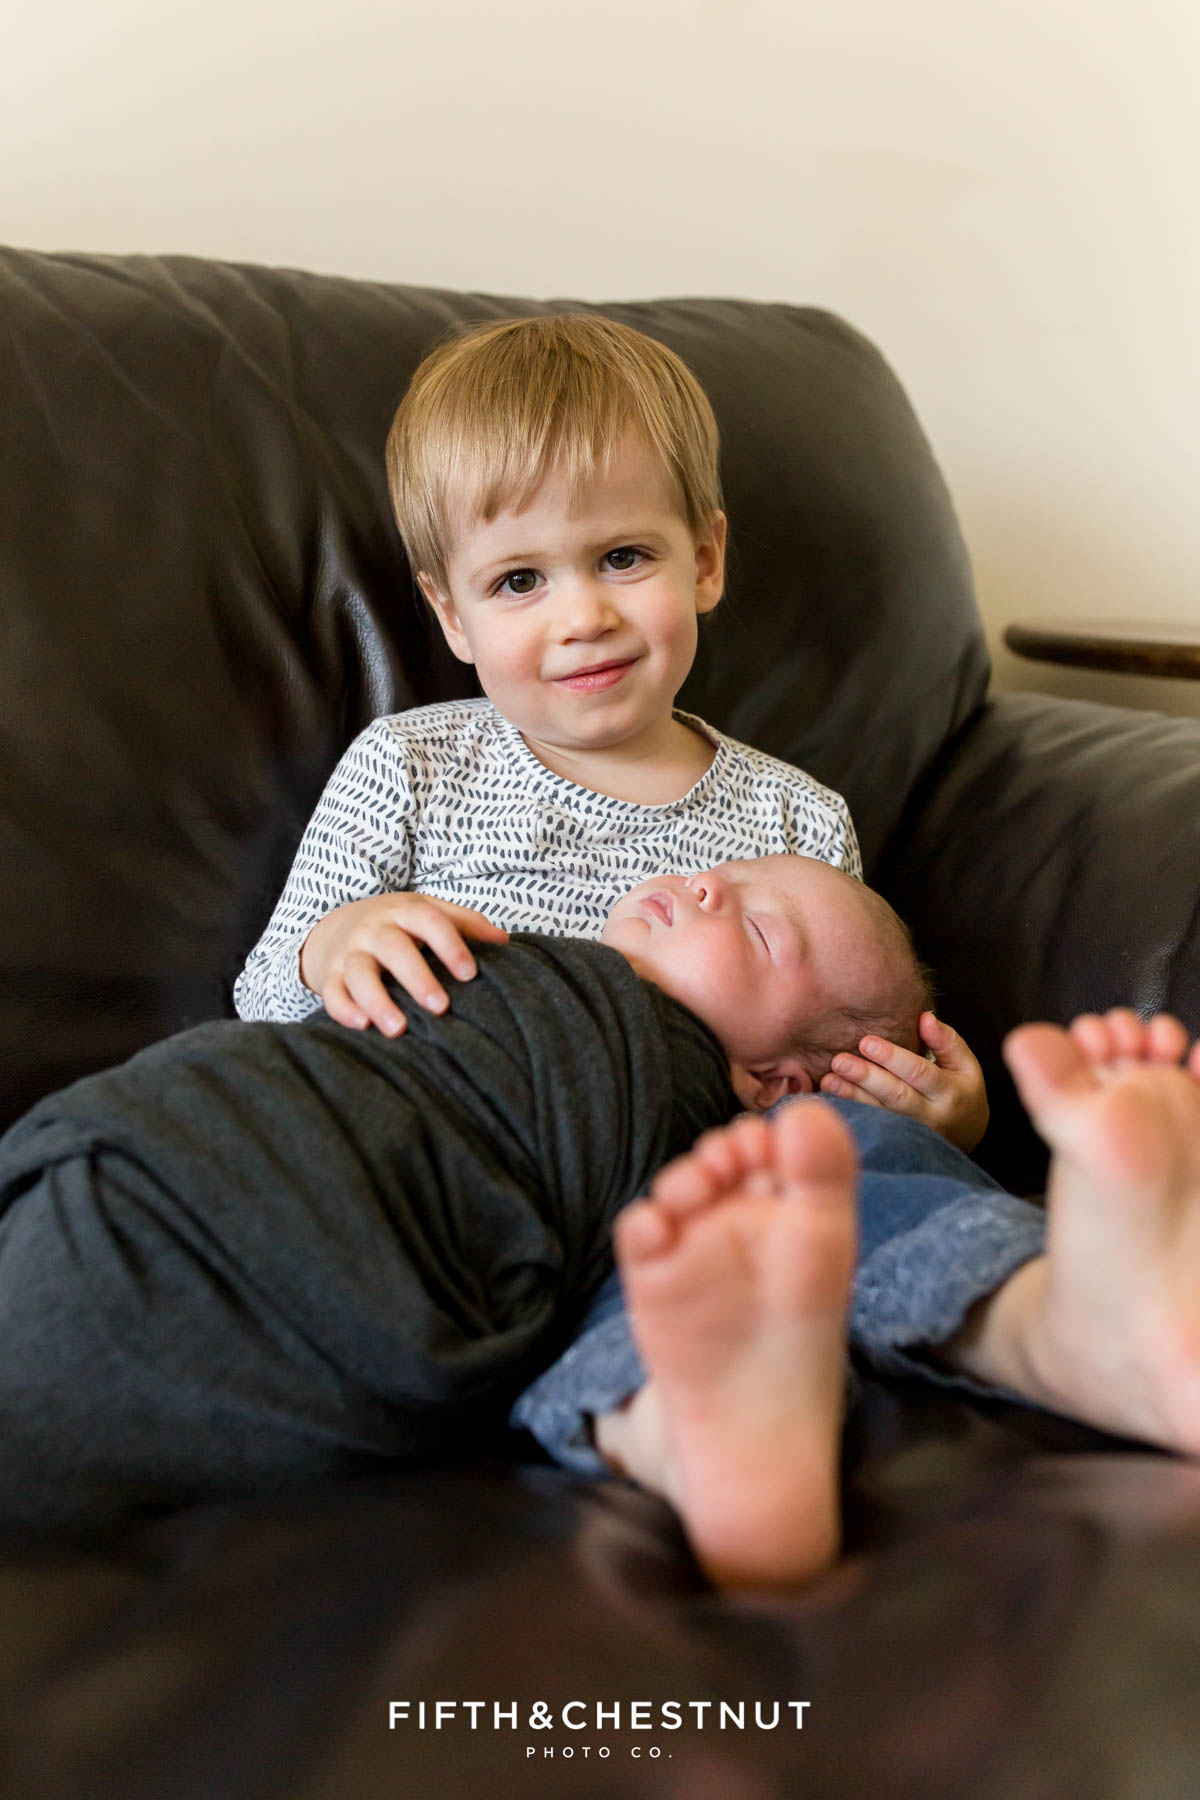 A color photo of a big brother toddler holding his new baby brother while sitting on a brown leather couch